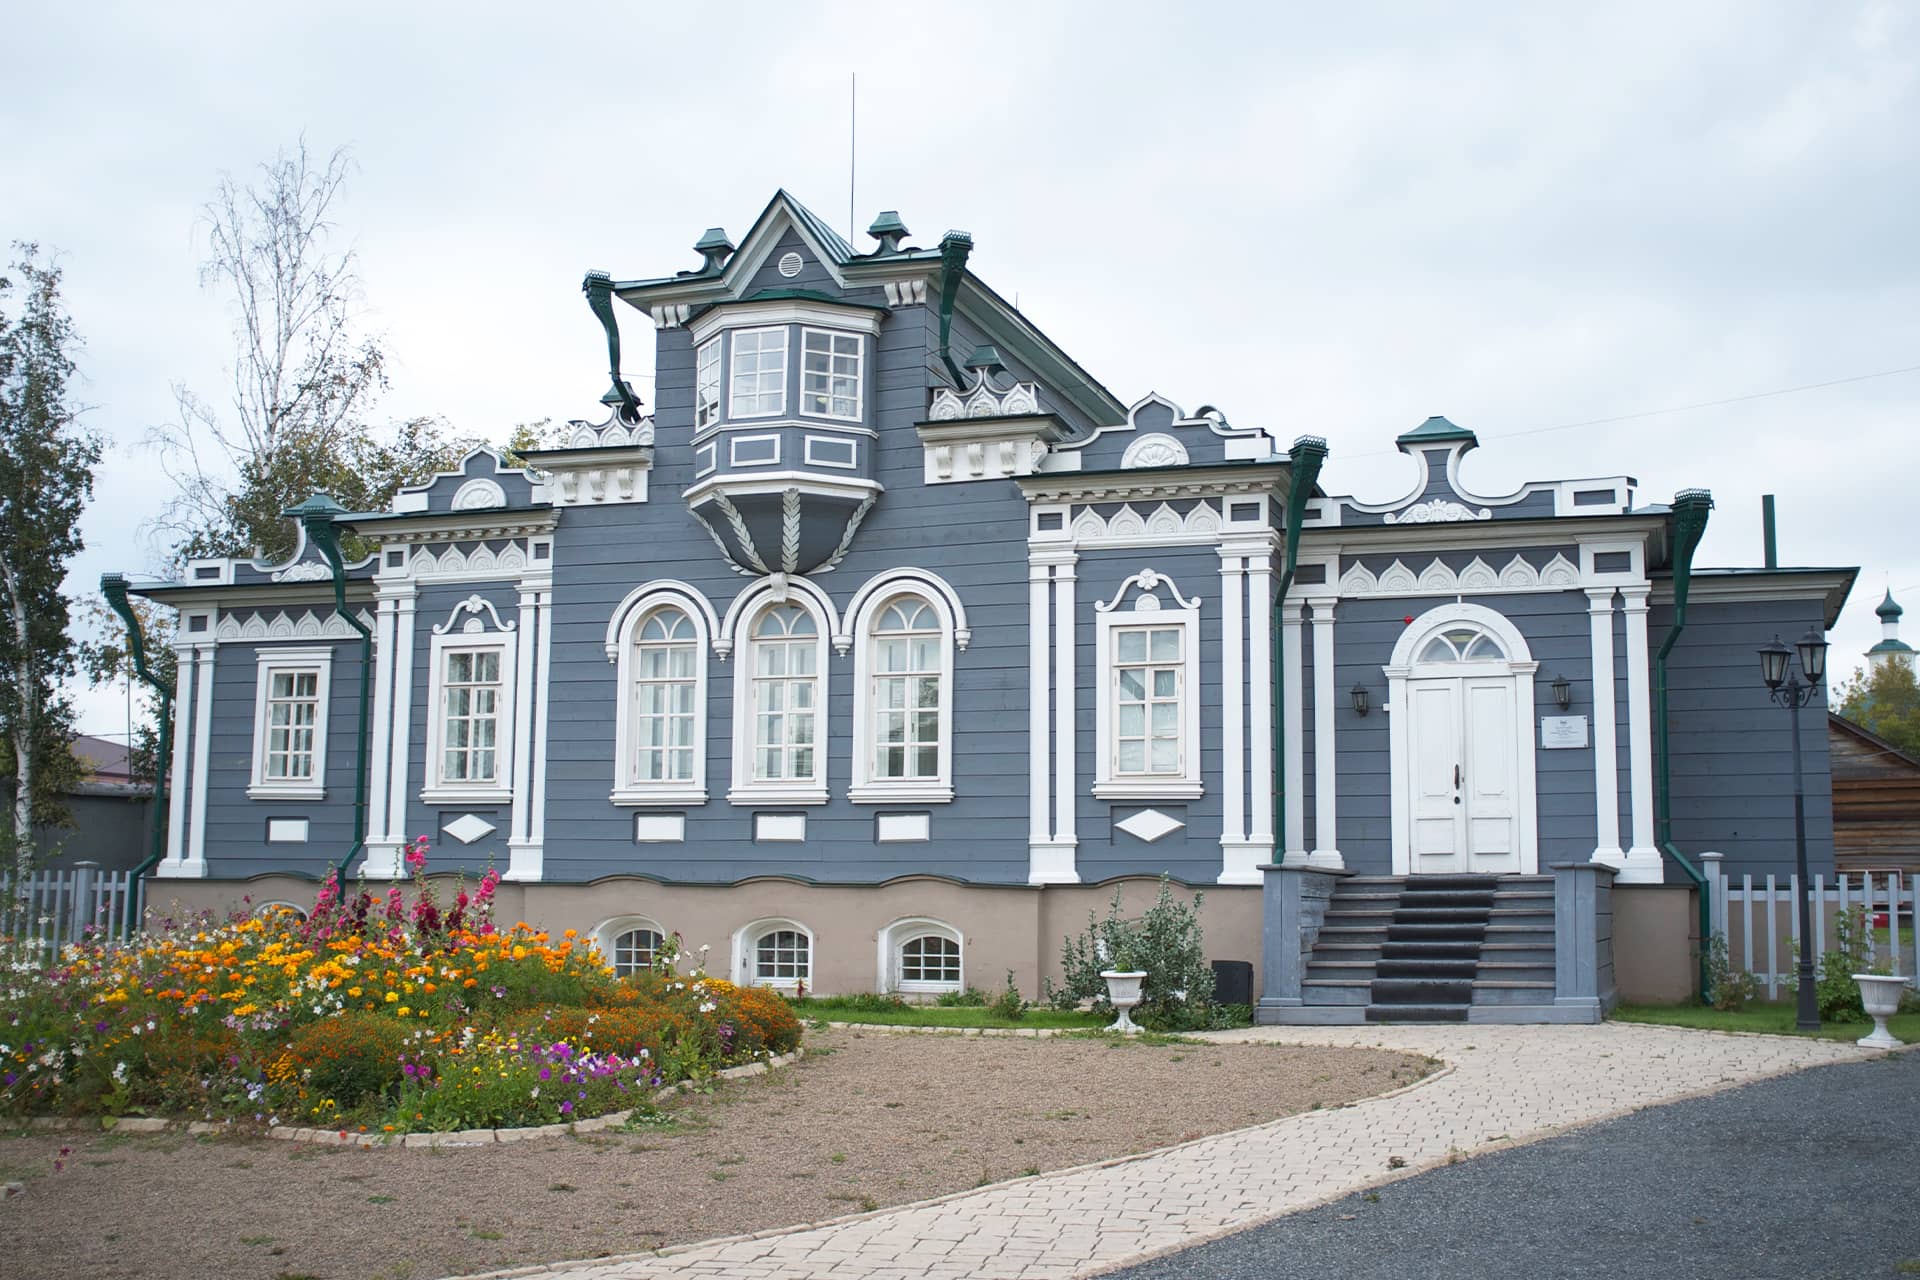 A grey and white wooden house built in the style of classical noble mansions decorated with a bay-window